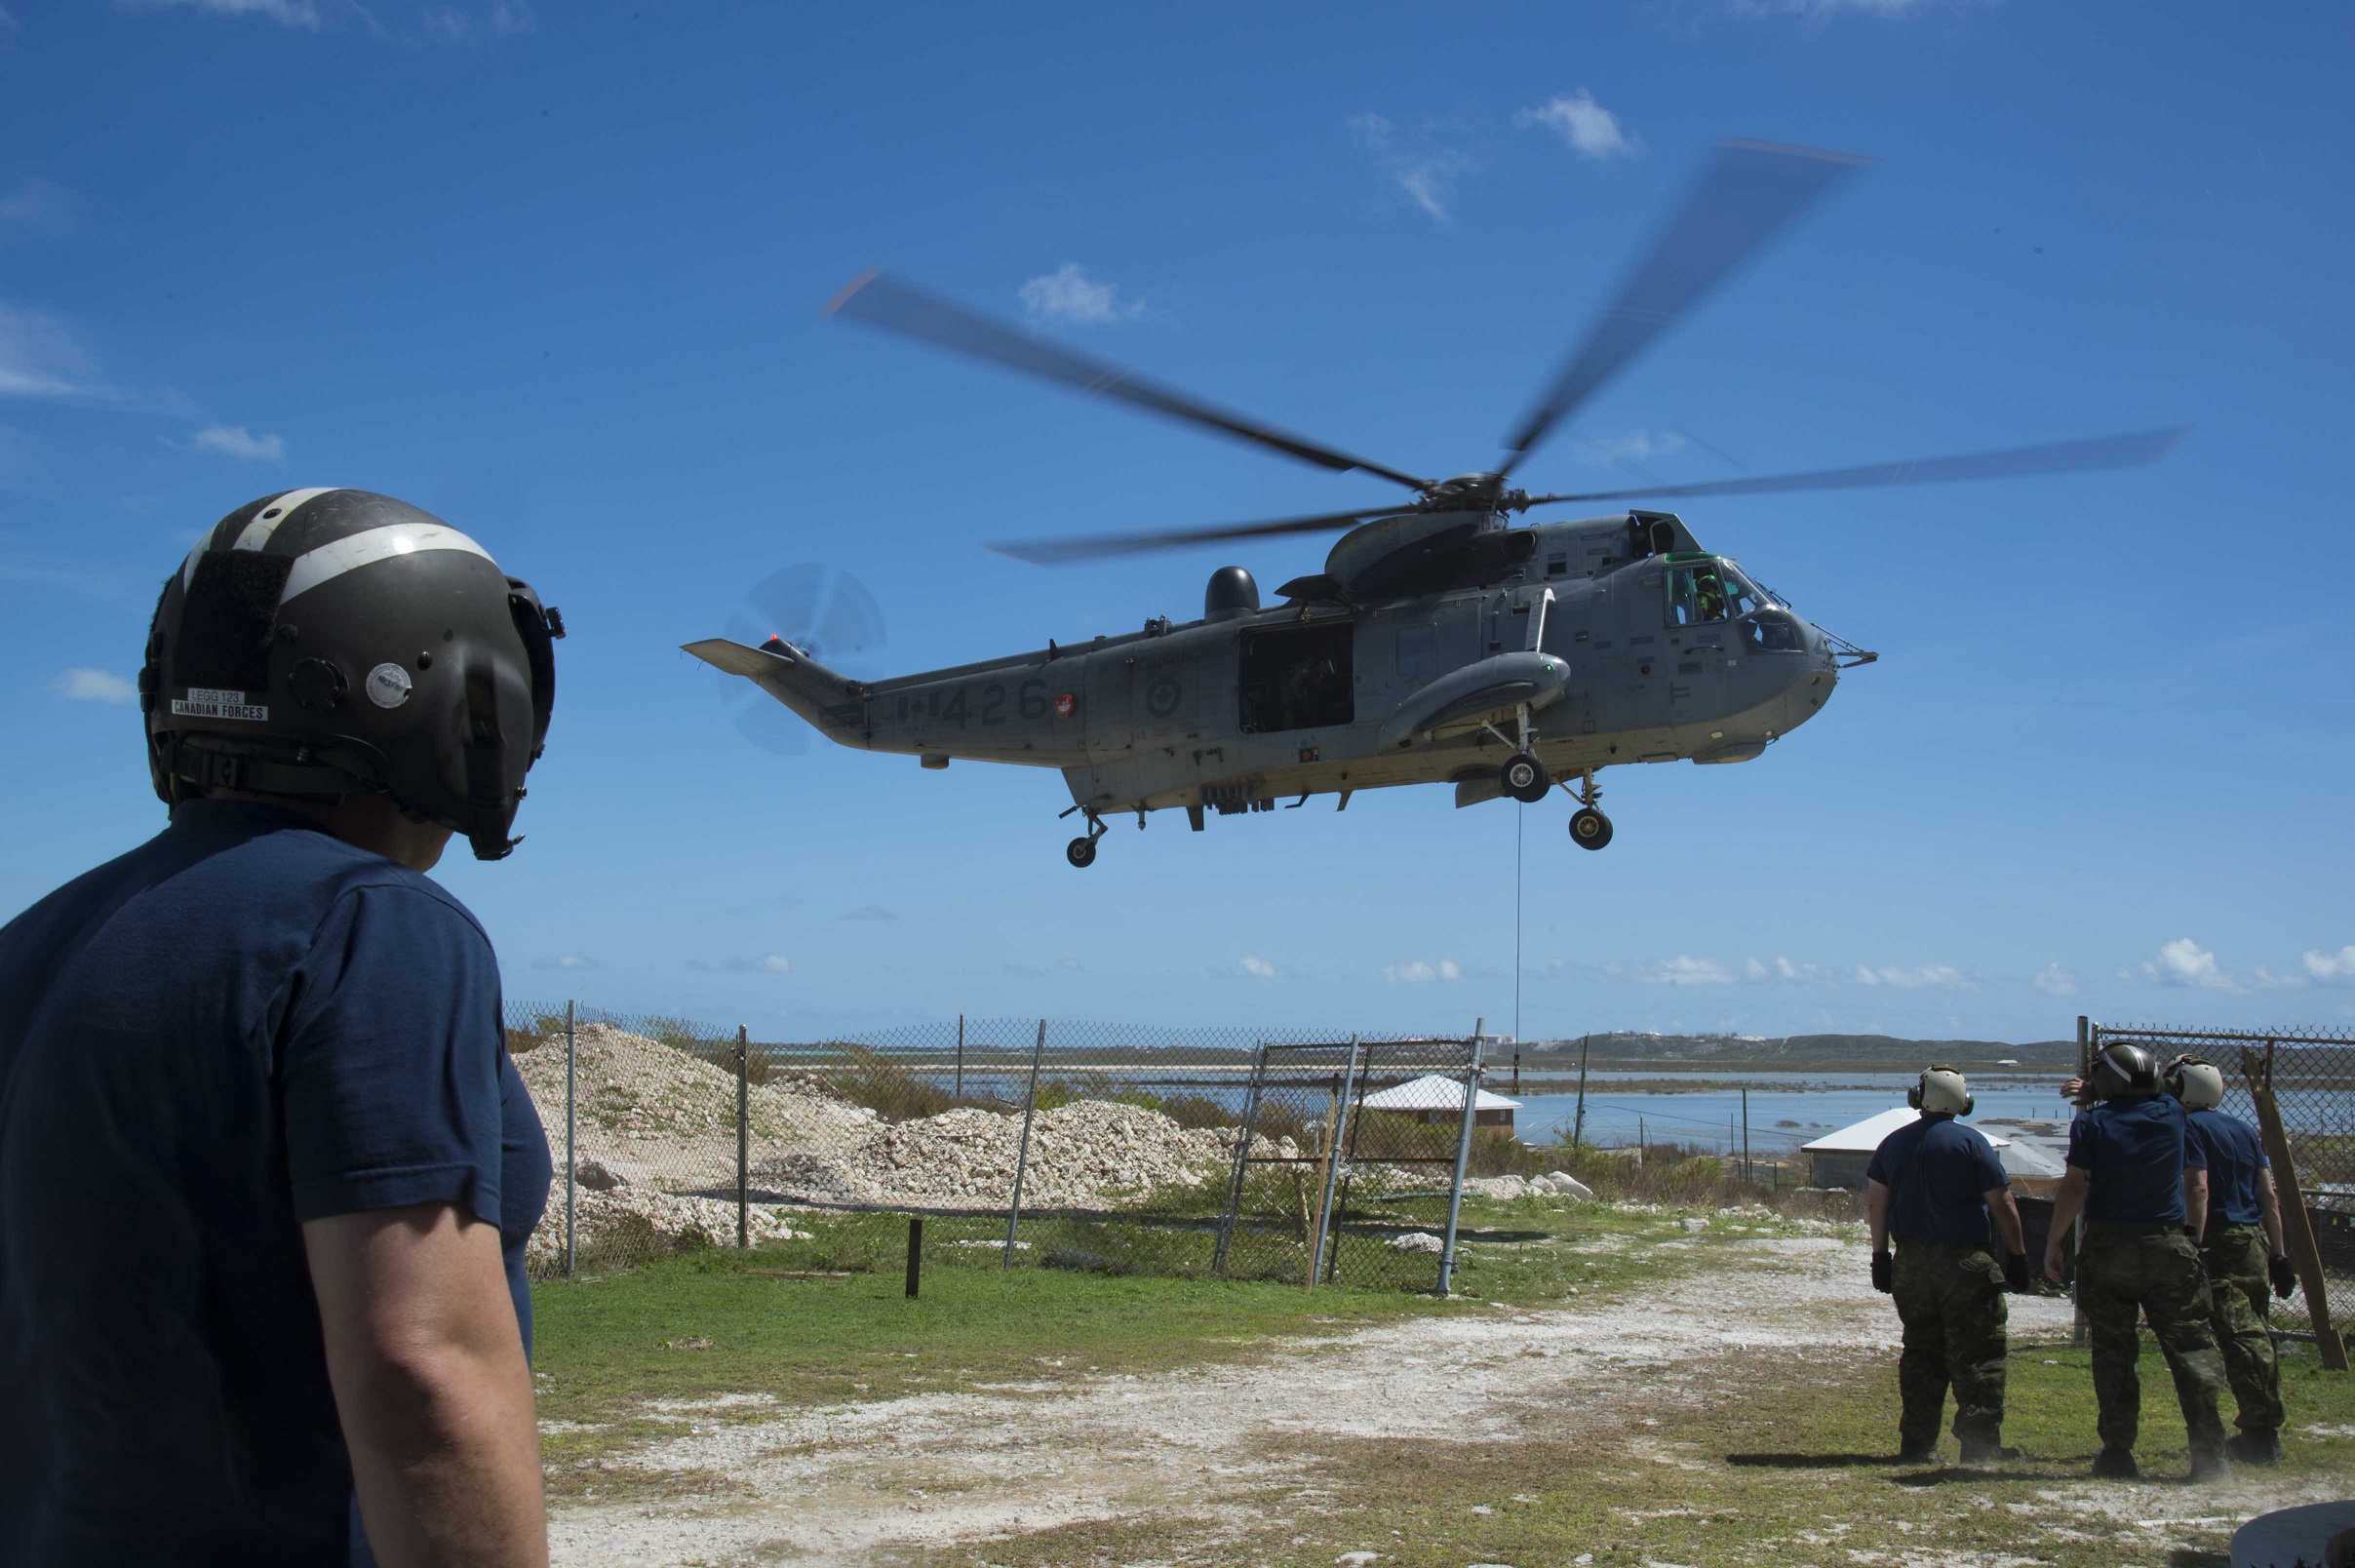 September 19, 2017. A CH-124 Sea King helicopter air lifts supplies to South Caicos Island during Operation RENAISSANCE IRMA, the Hurricane Irma humanitarian aid mission in the Caribbean, on September 19, 2017. Photo: MCpl Chris Ringius, Formation Imaging Services Halifax